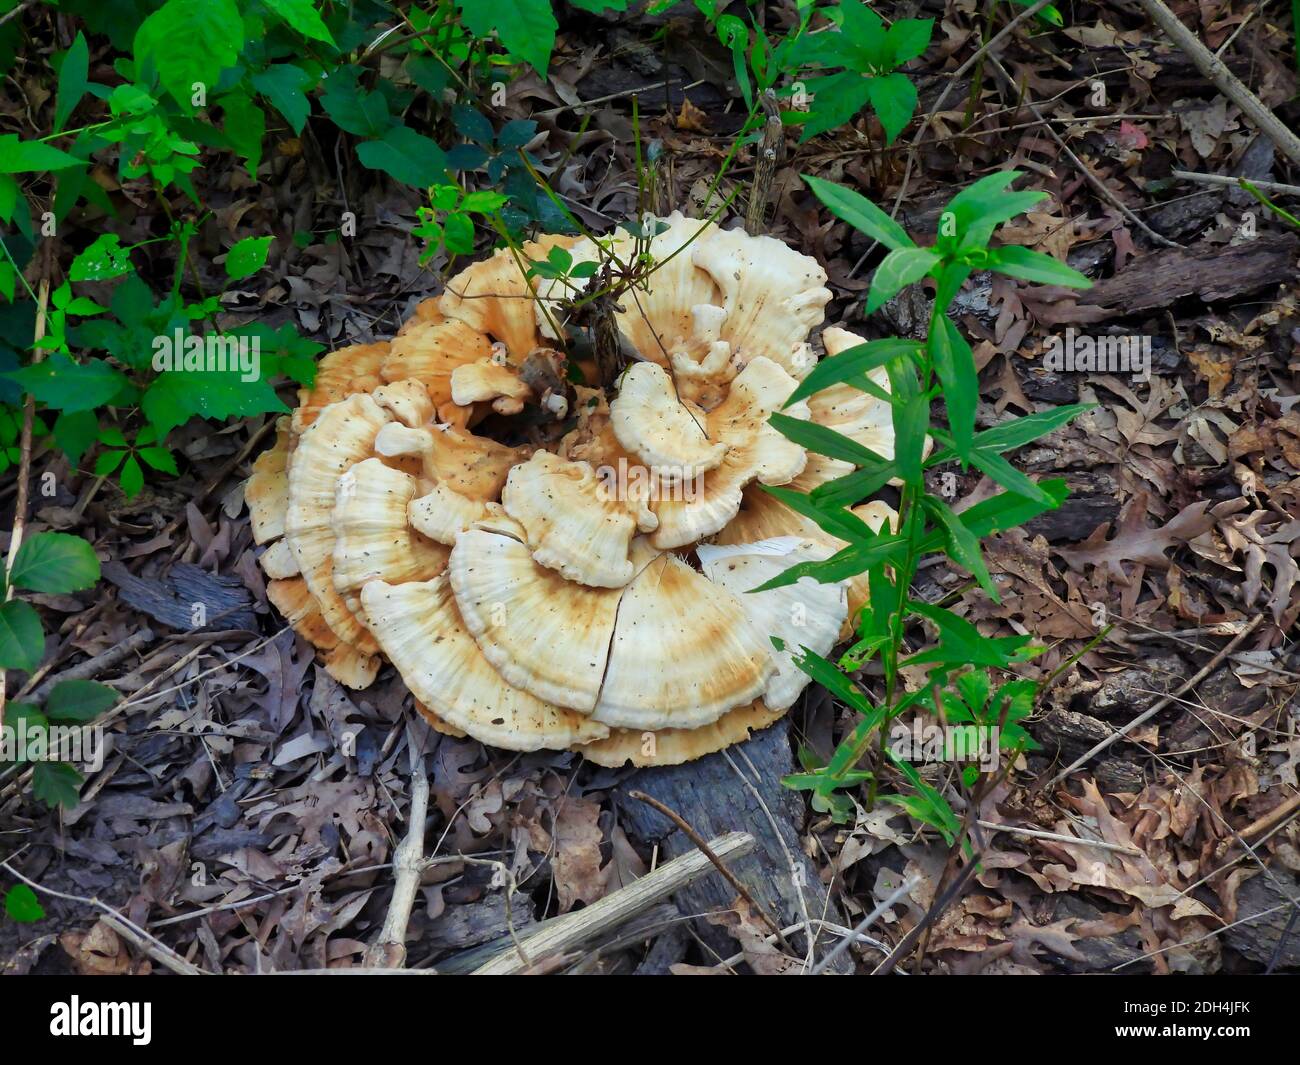 Wild Mushroom Large Polypore Growing from Wood Chipped Trail with Green Vegetation Growing Through the White and Brown Mushroom Fungi Fungus Stock Photo